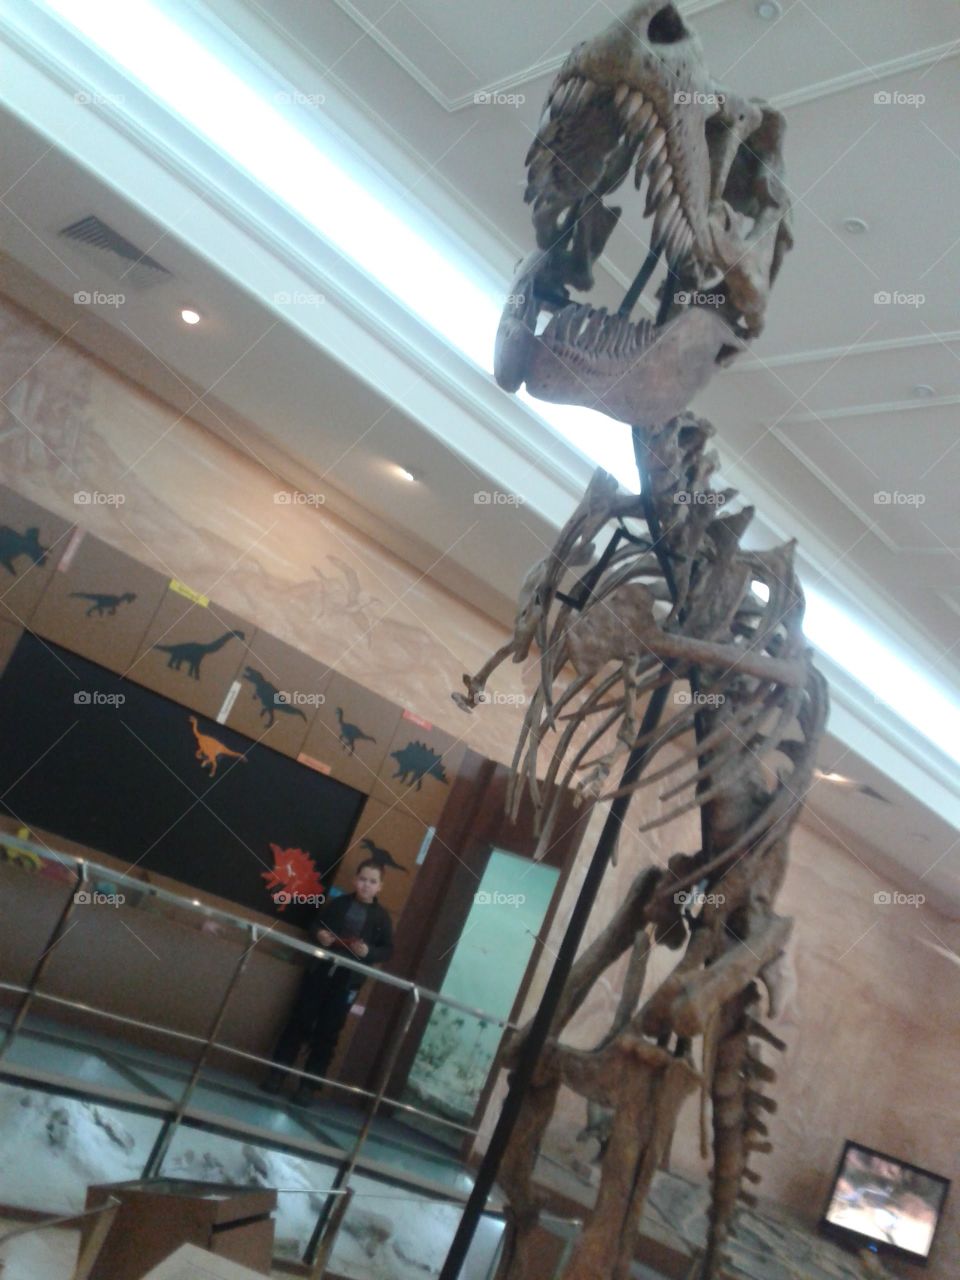 Tyrannosaurus skeleton in Kazan natural history museum
Leight of this incredible creatue- over 11 meters!
Thats giant!